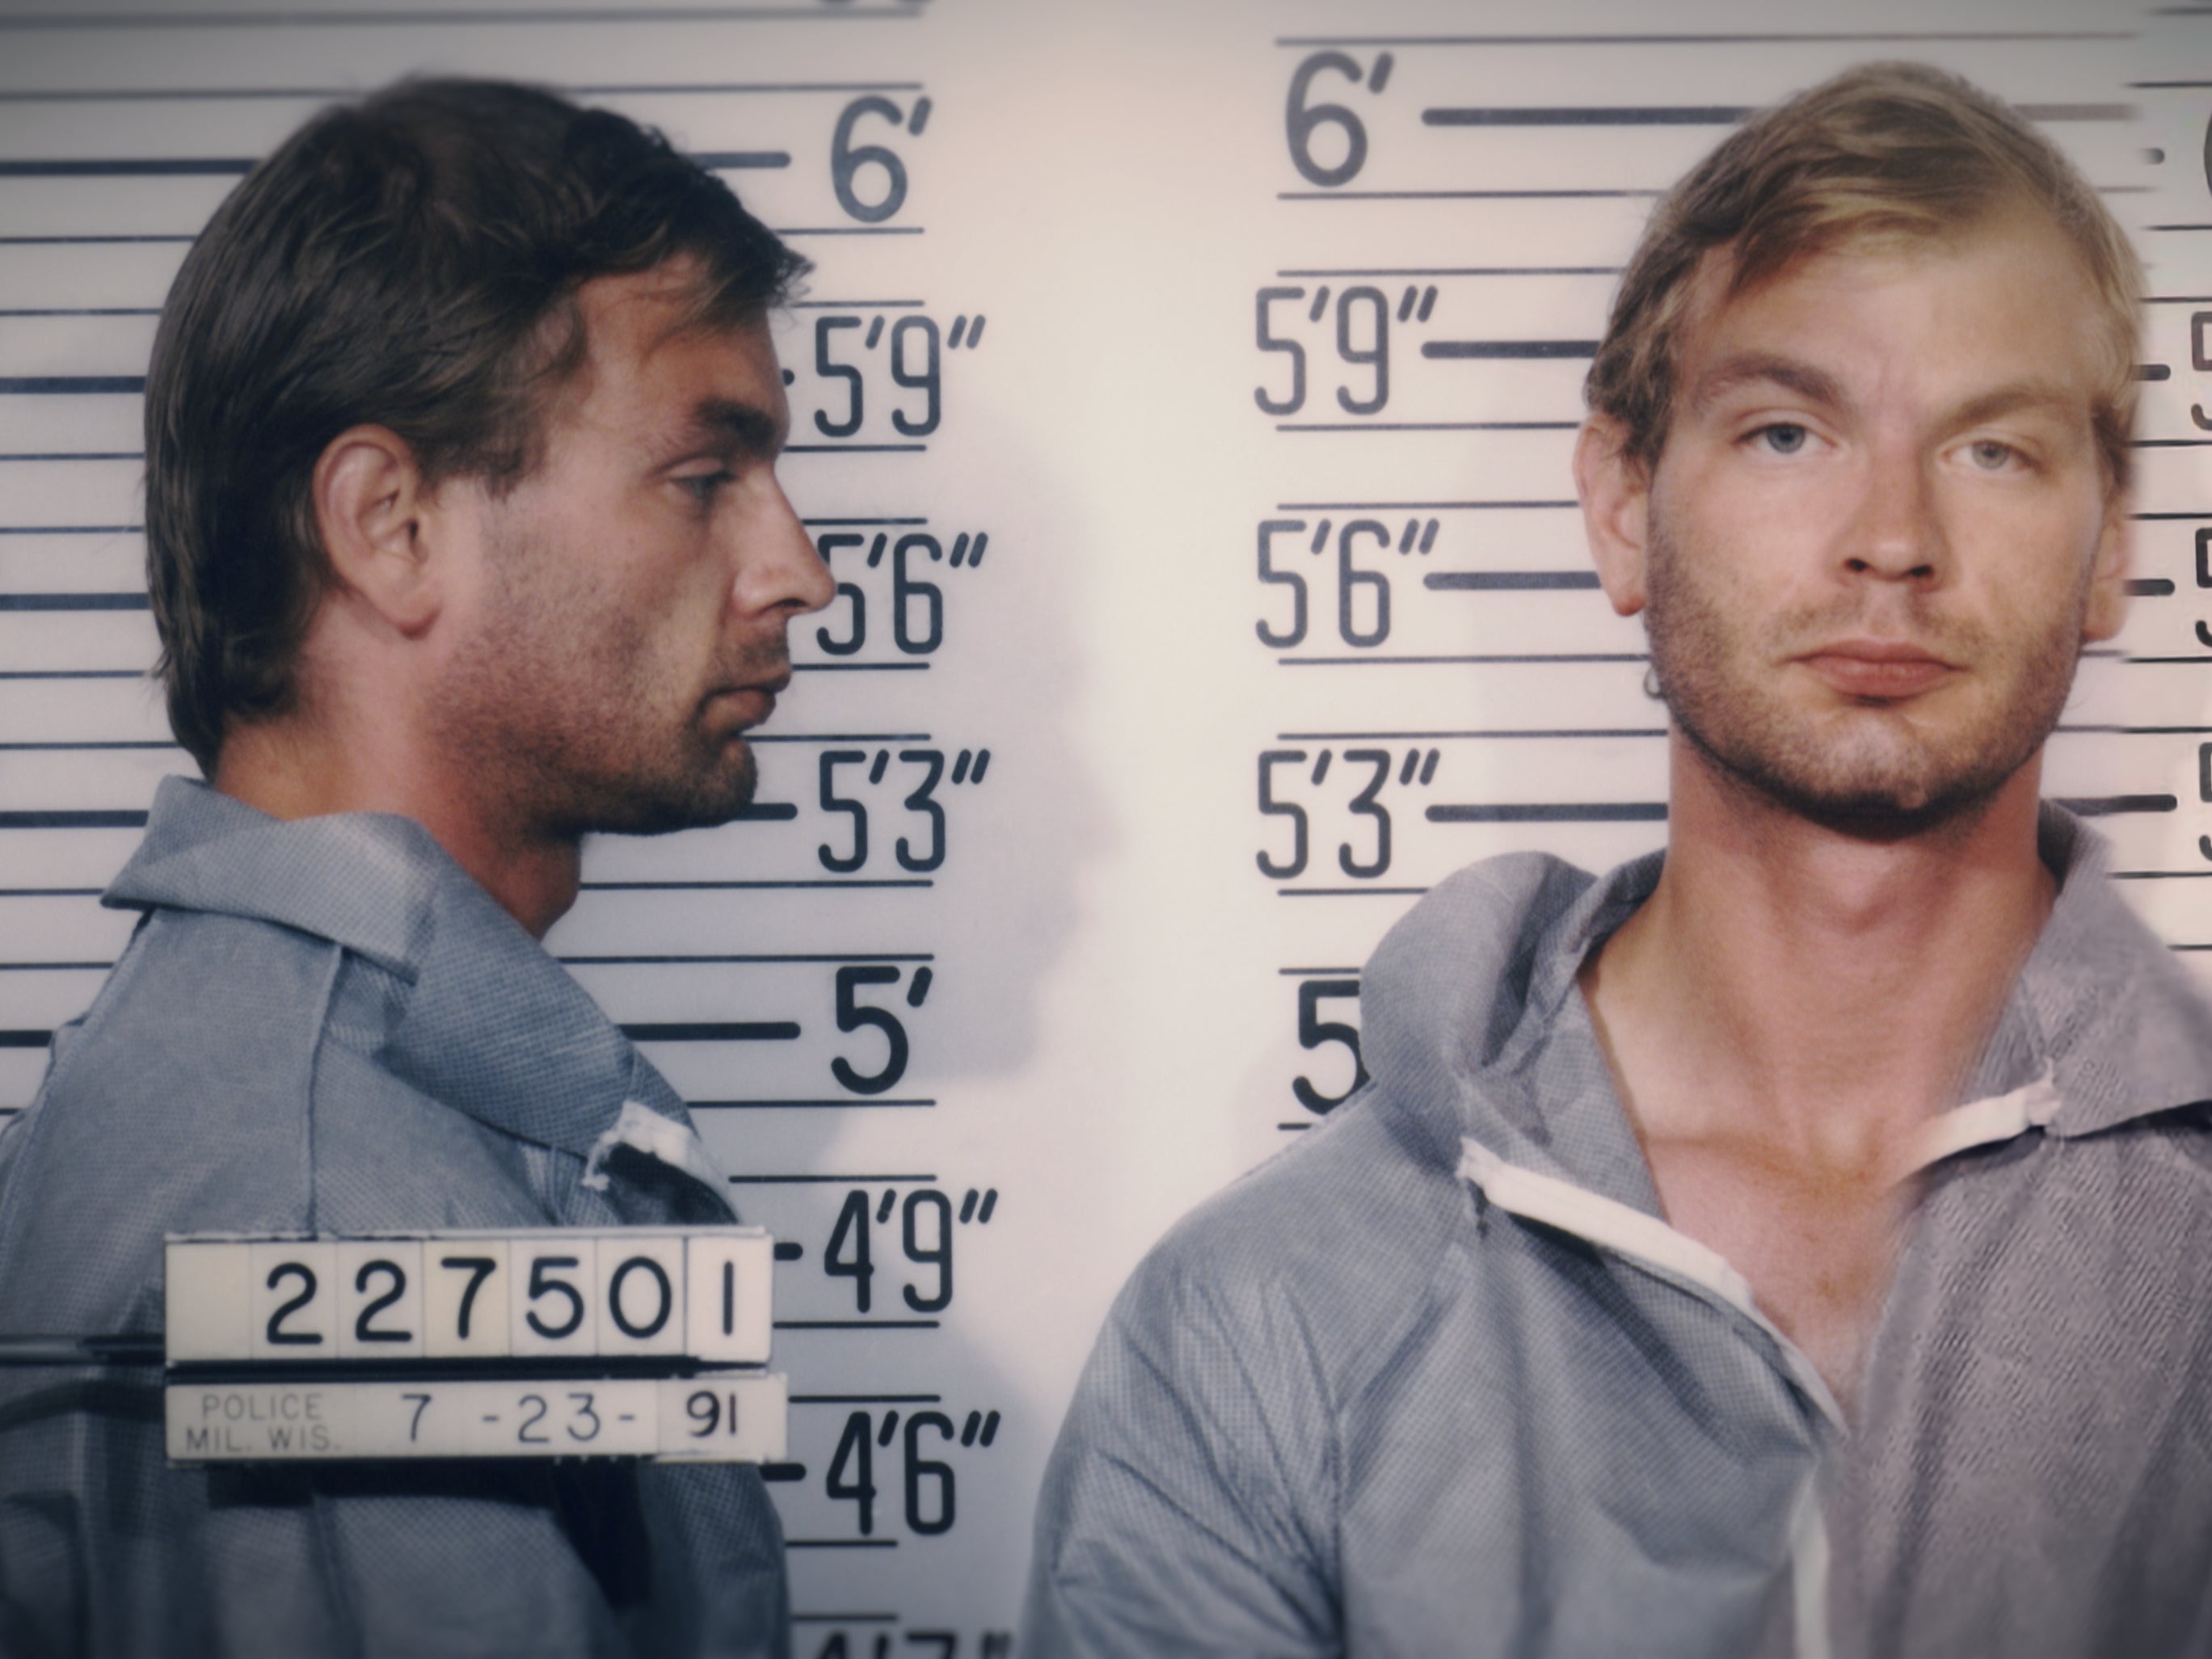 Dahmer on Netflix: The controversy over True Crime shows